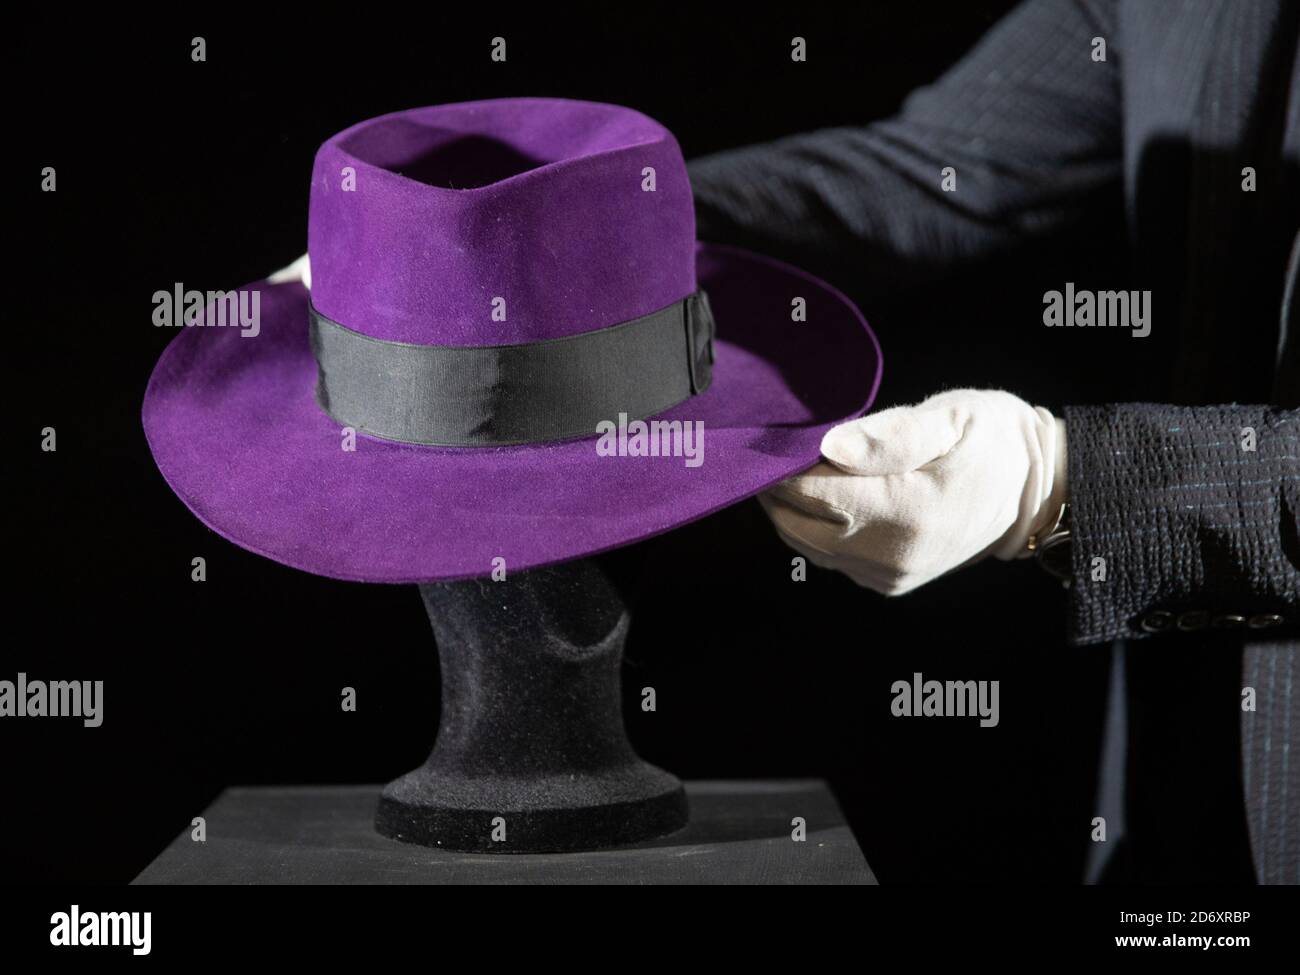 Joker's (Jack Nicholson) fedora from the 1989 film 'Batman' (estimate £20,000-30,000) during a preview ahead of the Prop Store's Film and TV memorabilia Auction taking place over 1st and 2nd December 2020. Stock Photo